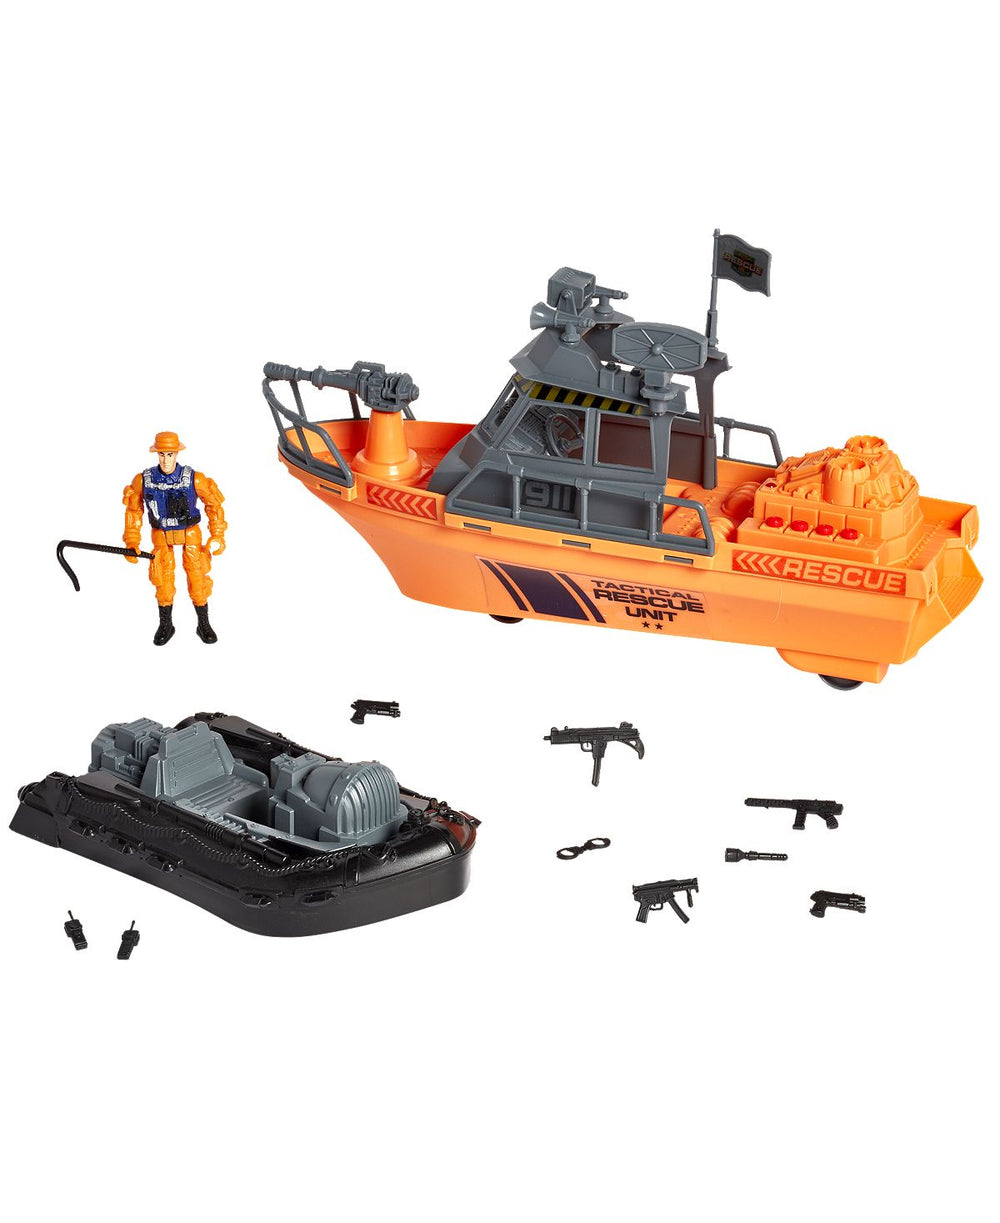 True Heroes Tactical Rescue Boat Playset with Action Figure and Accessories